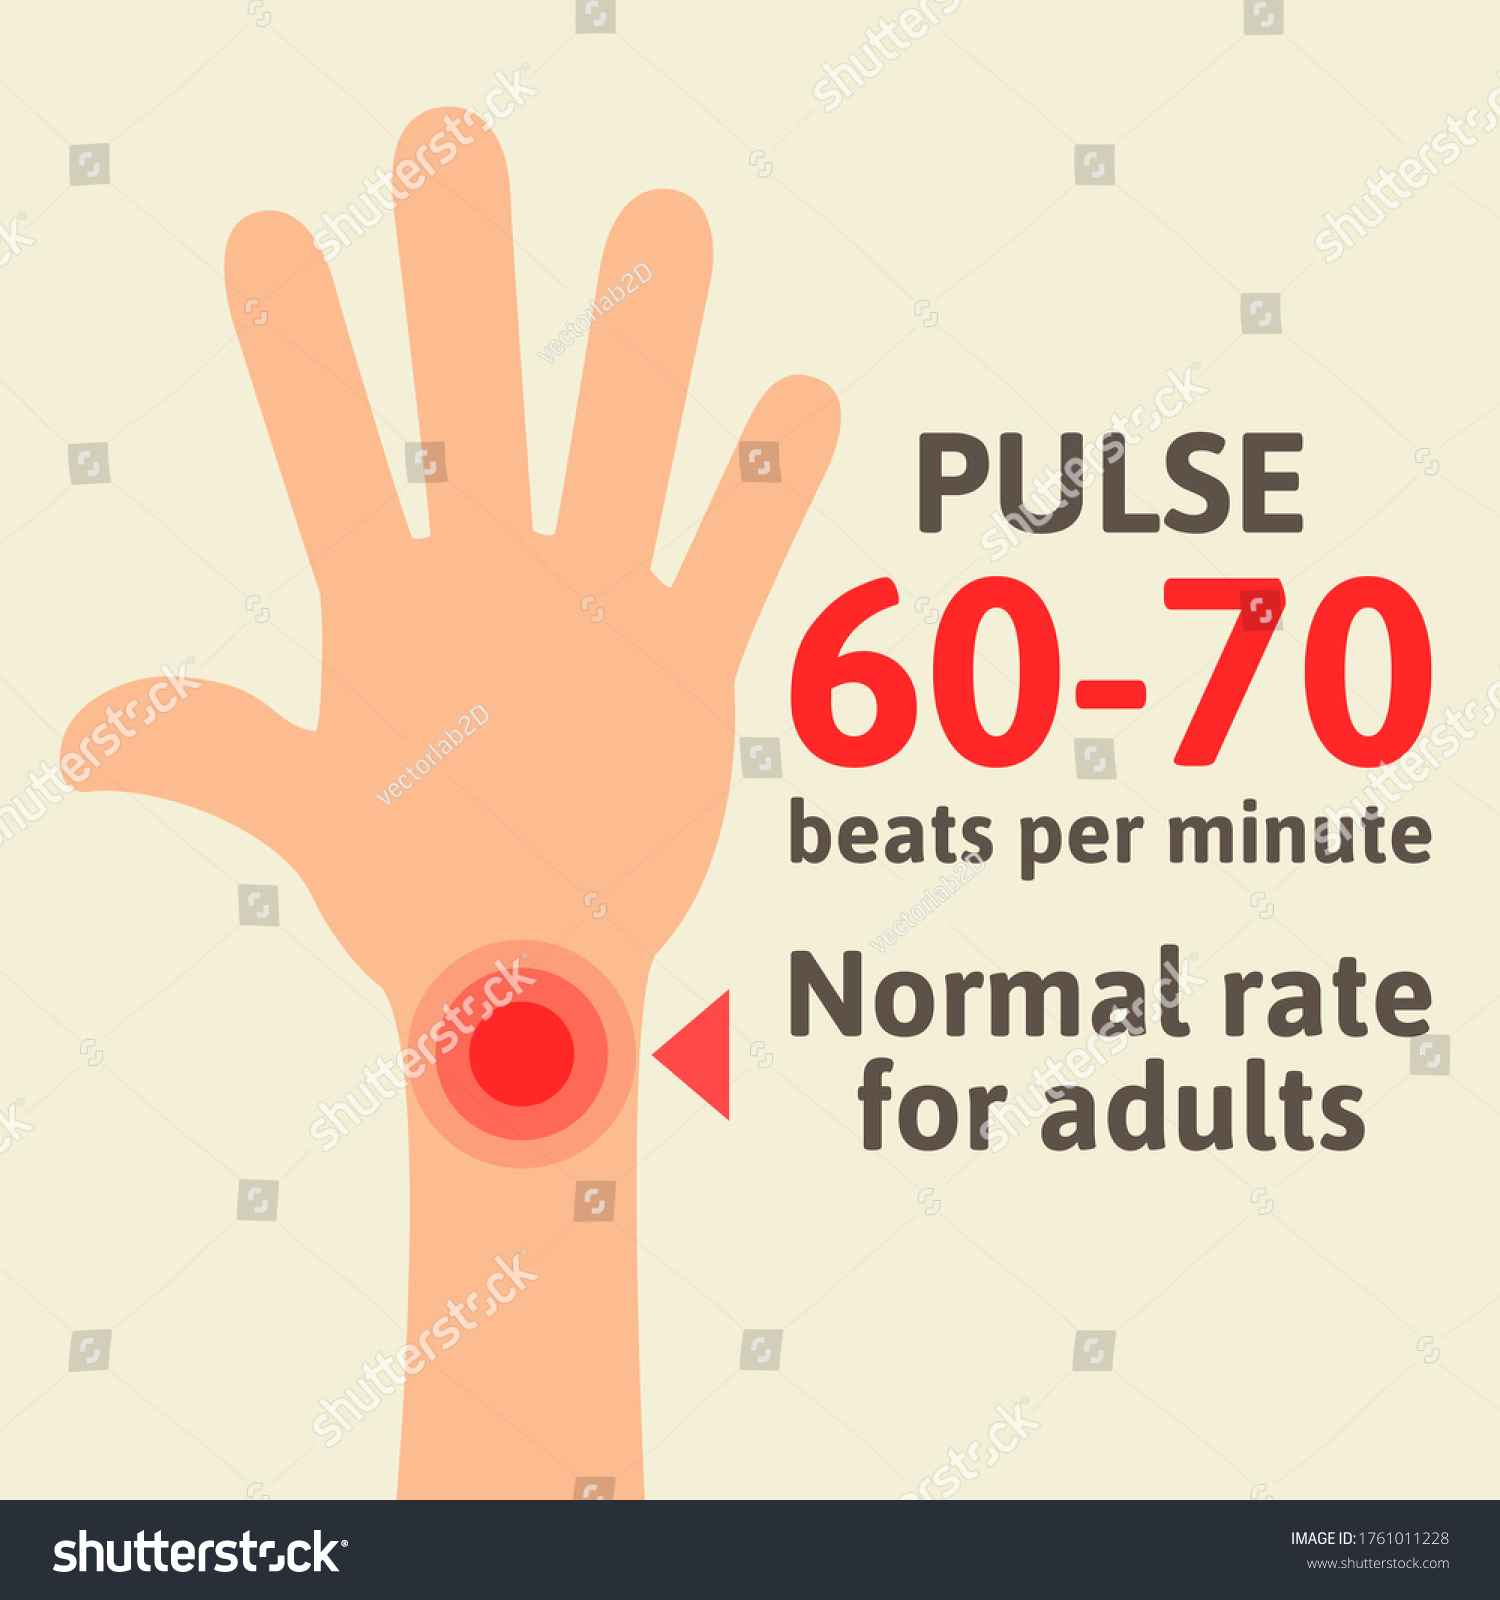 For adults pulse rate normal Normal Heart